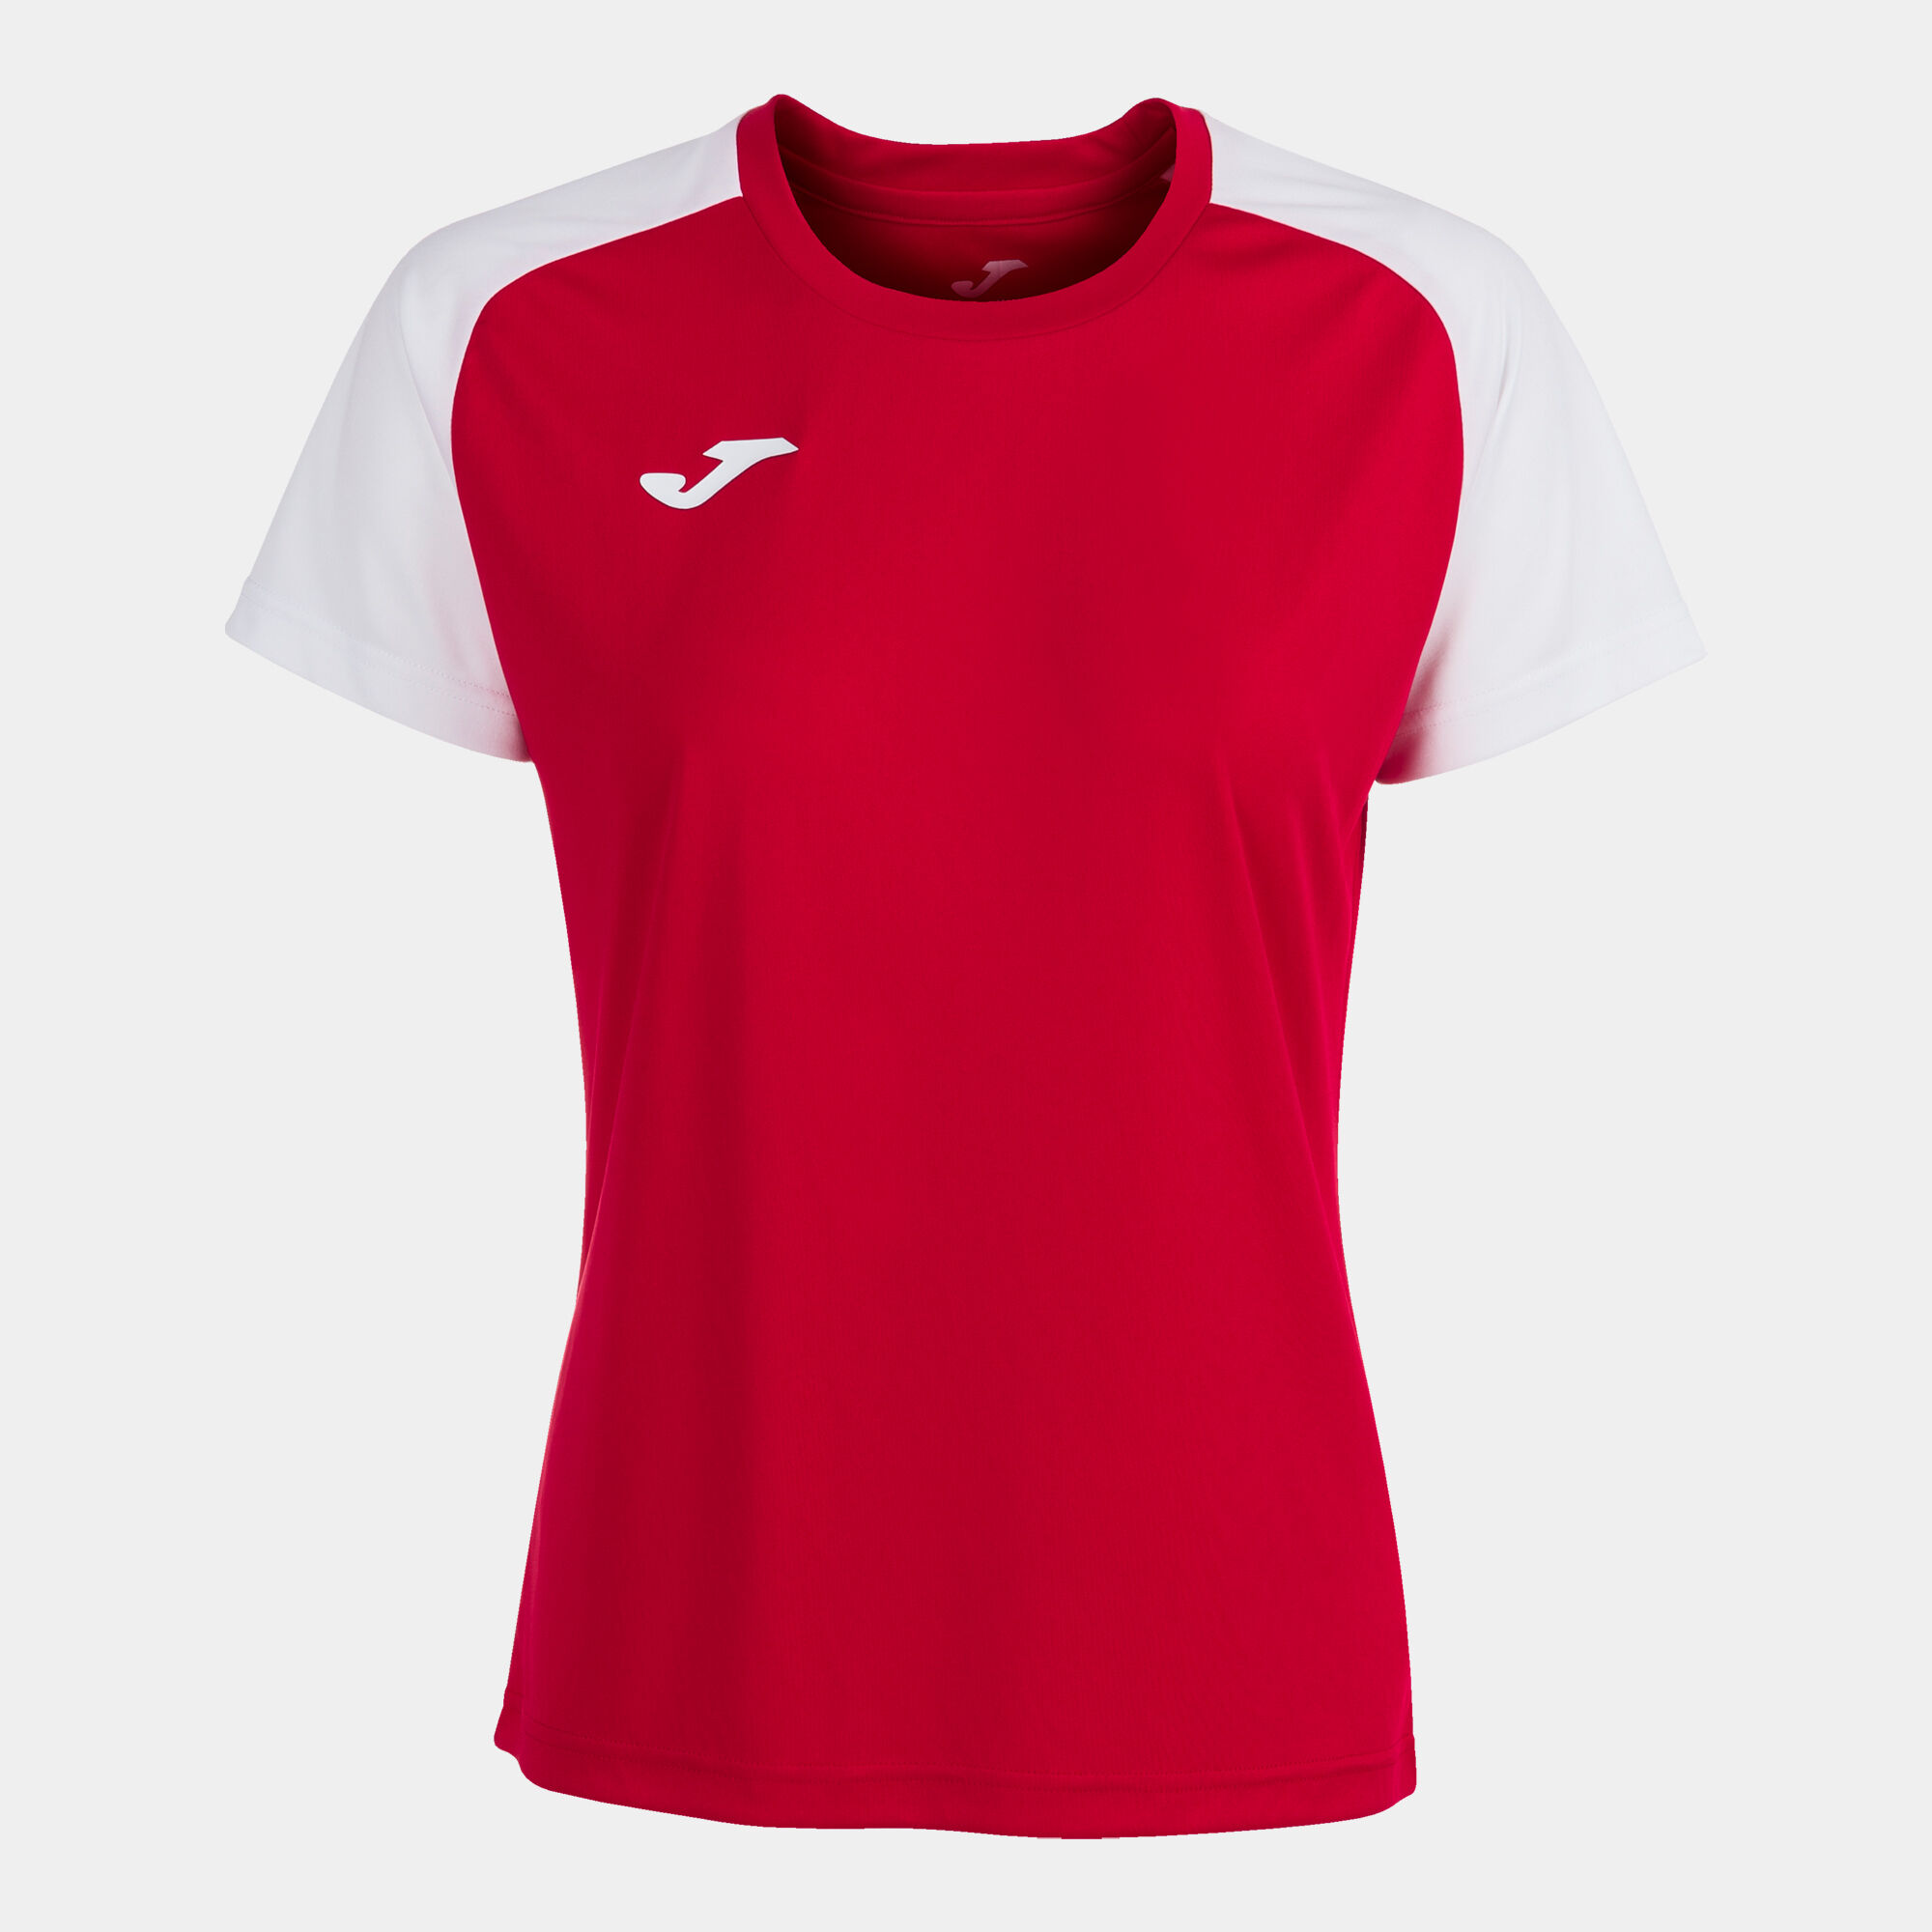 SHIRT SHORT SLEEVE WOMAN ACADEMY IV RED WHITE